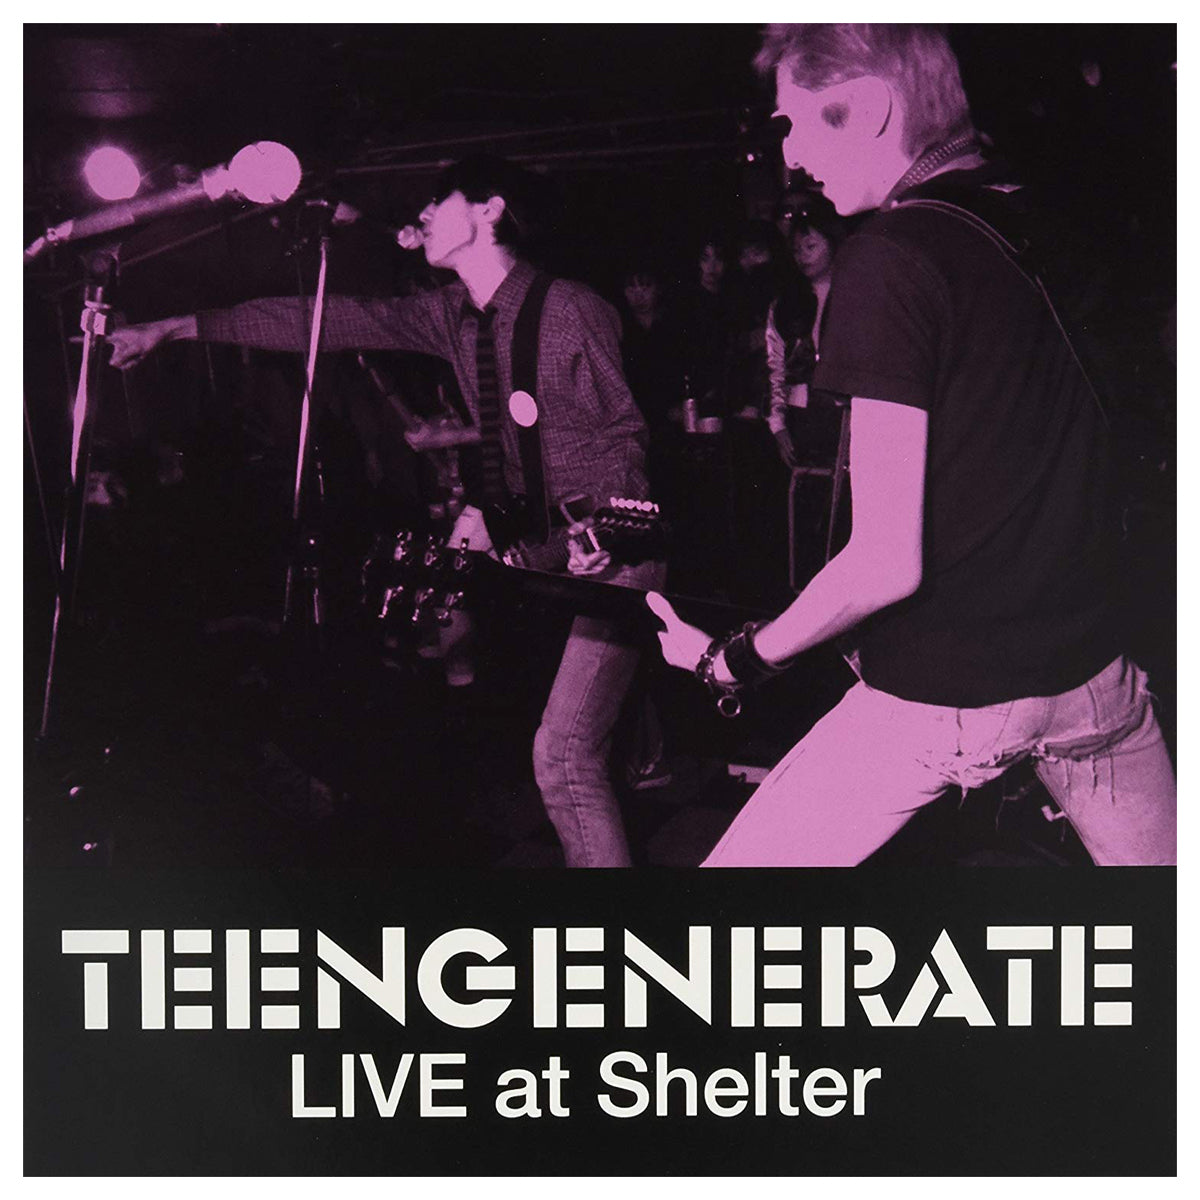 Teengenerate- Live At Shelter CD ~REISSUE!